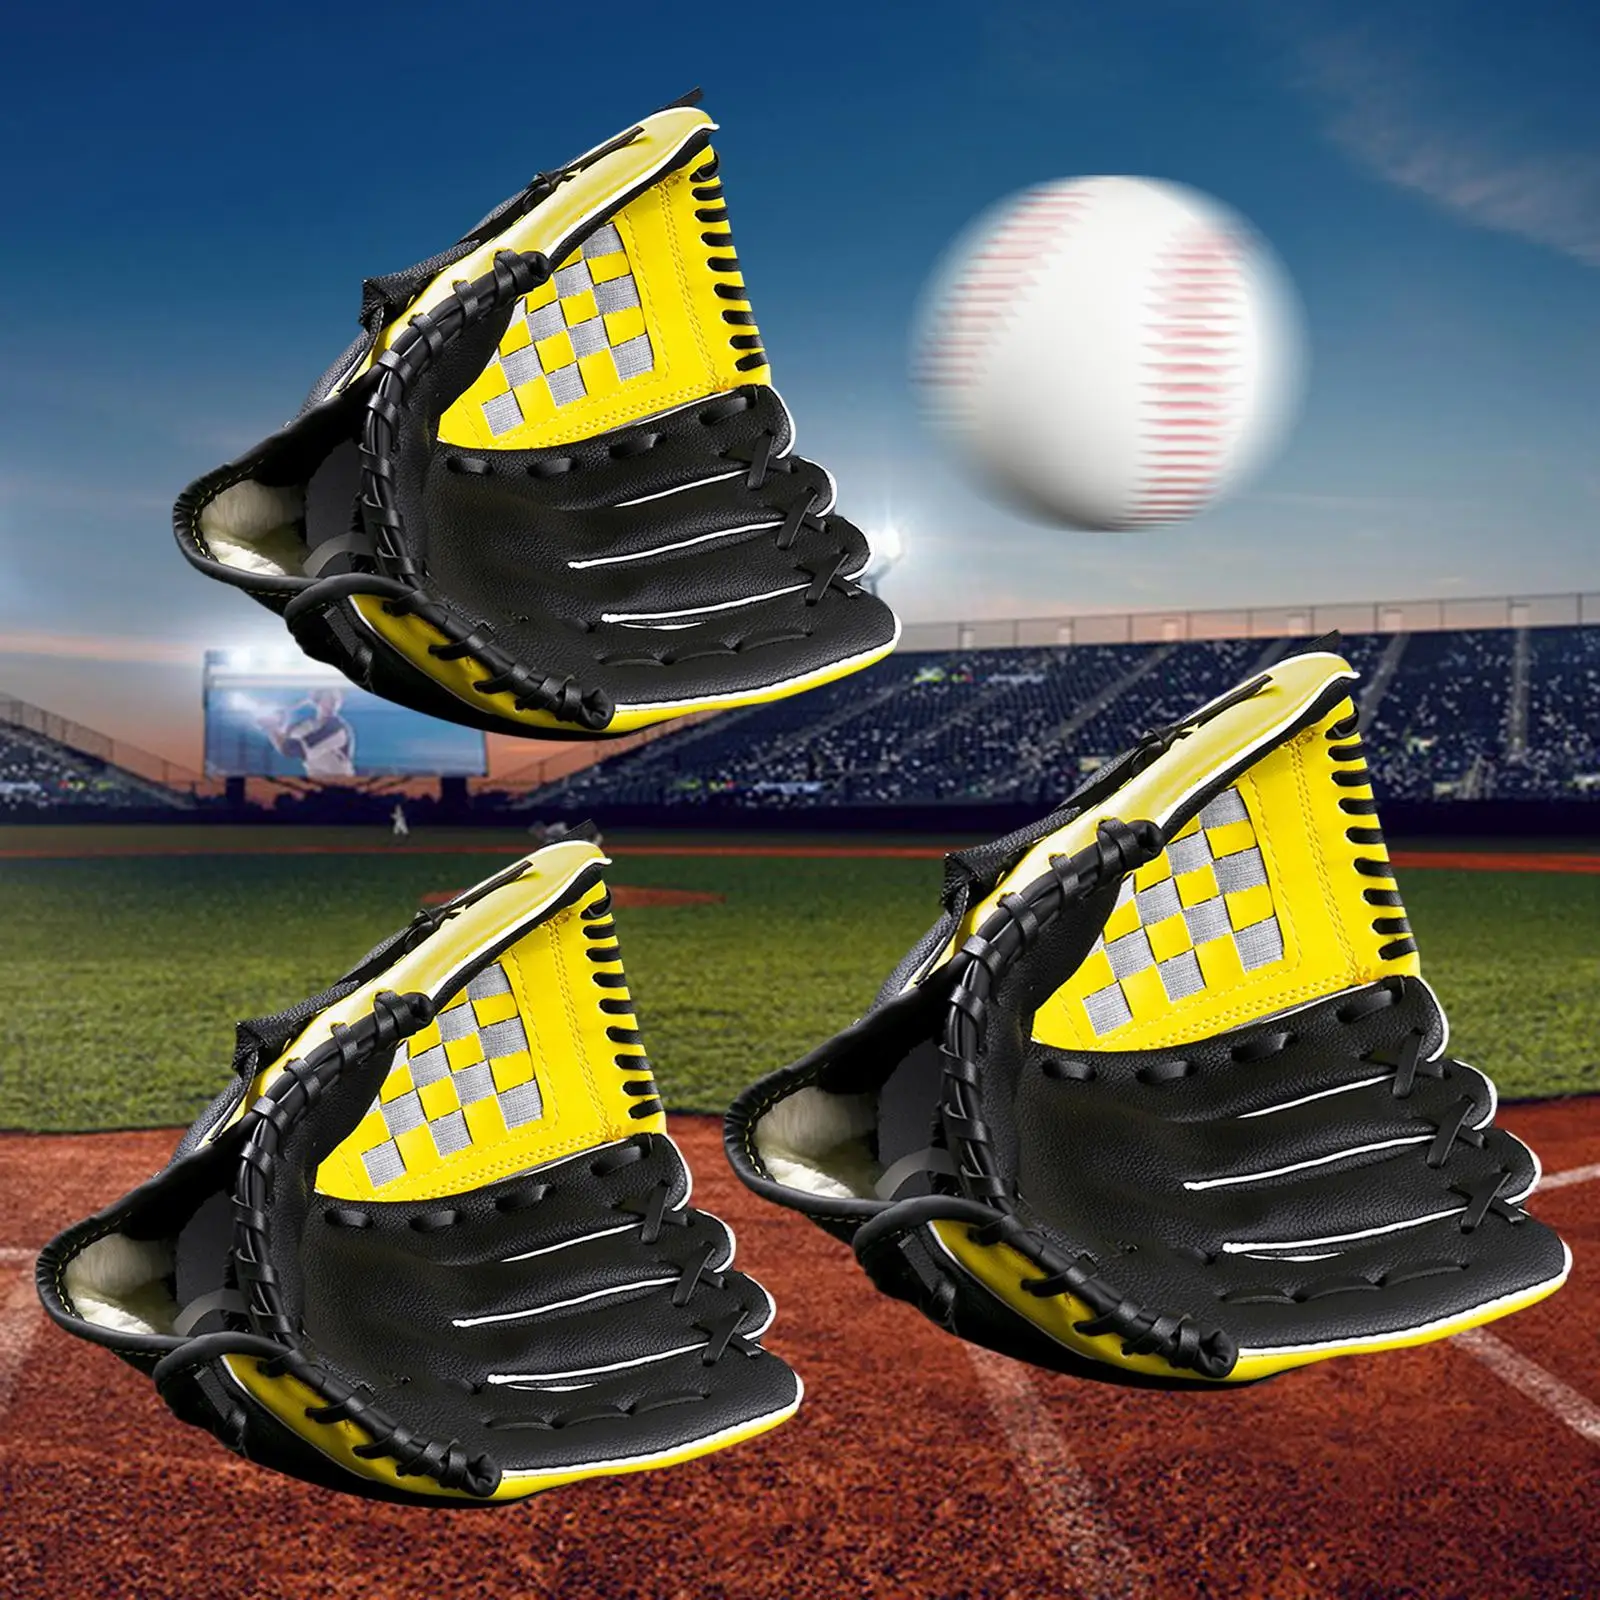 Baseball Glove Durable Catchers PU Teeball Gloves Right Handed Thrower for Training Practice Equipment Outdoor Sports